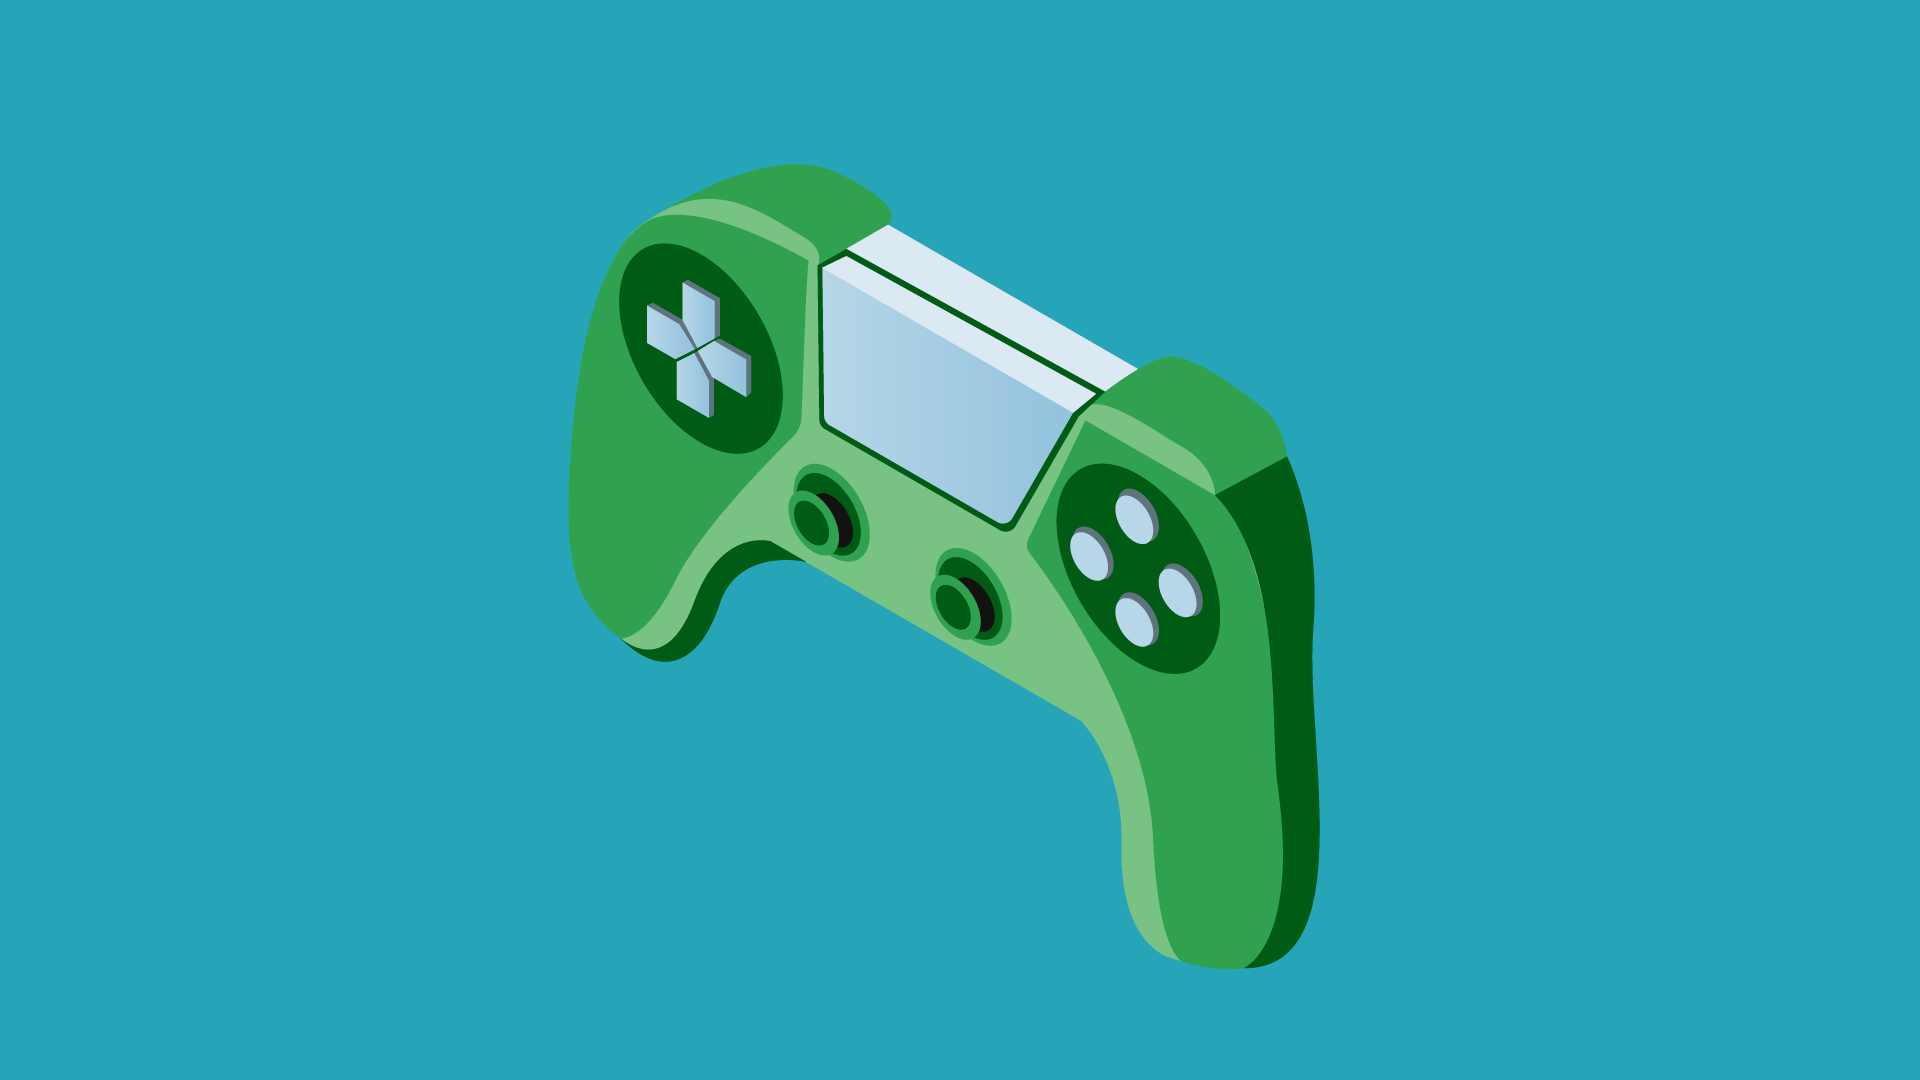 Illustration of a green gaming controller on a blue background.